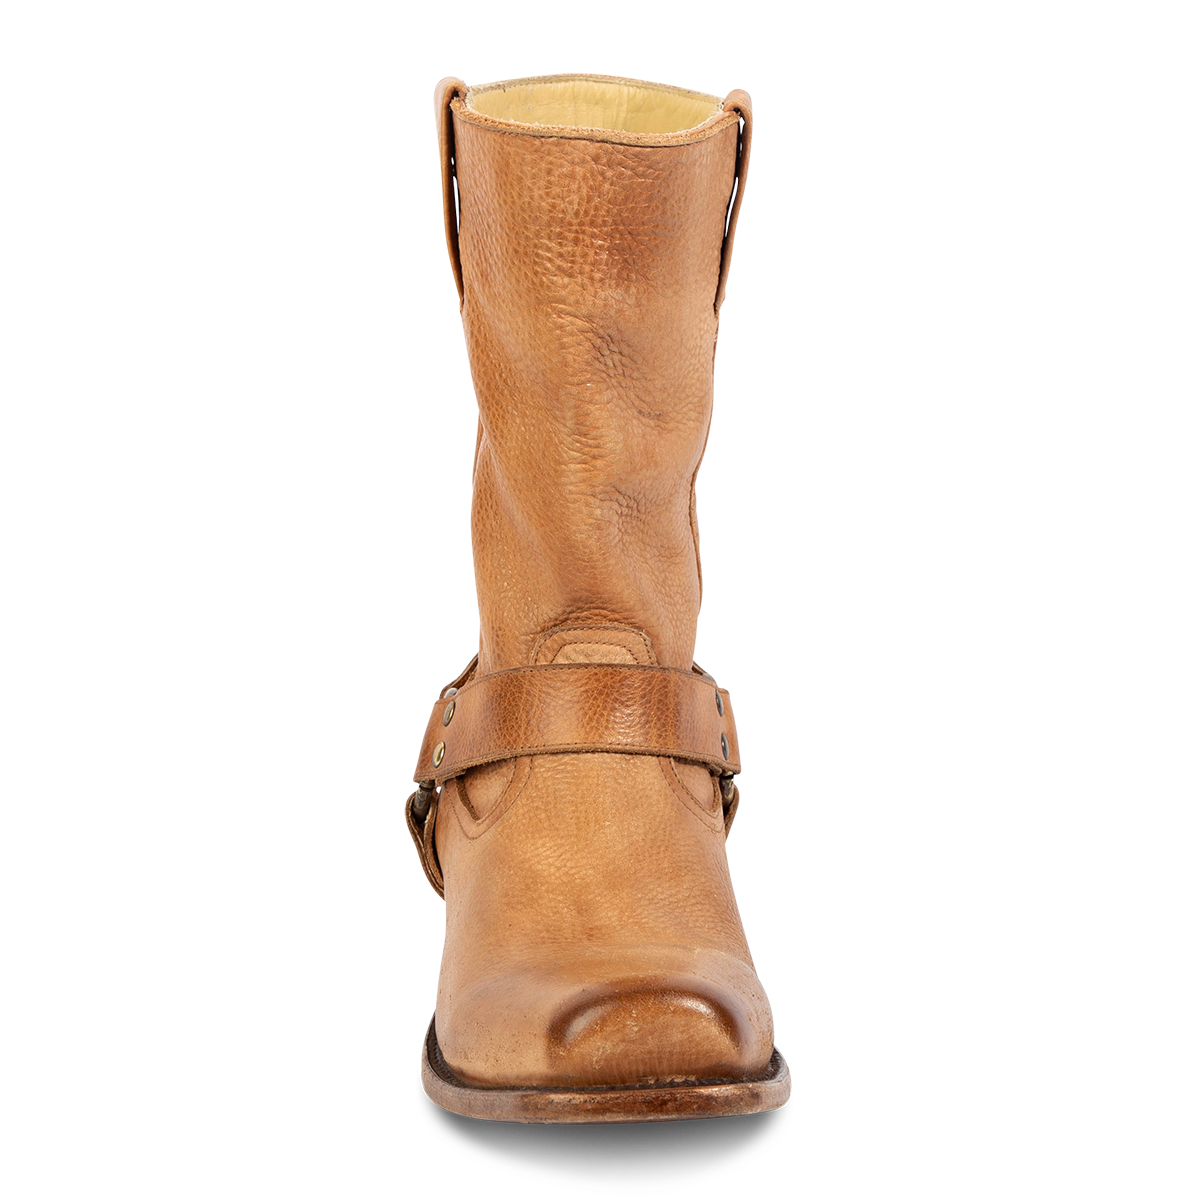 Front view showing distressed shaft and leather ankle harness on FREEBIRD men's Copperhead banana boot